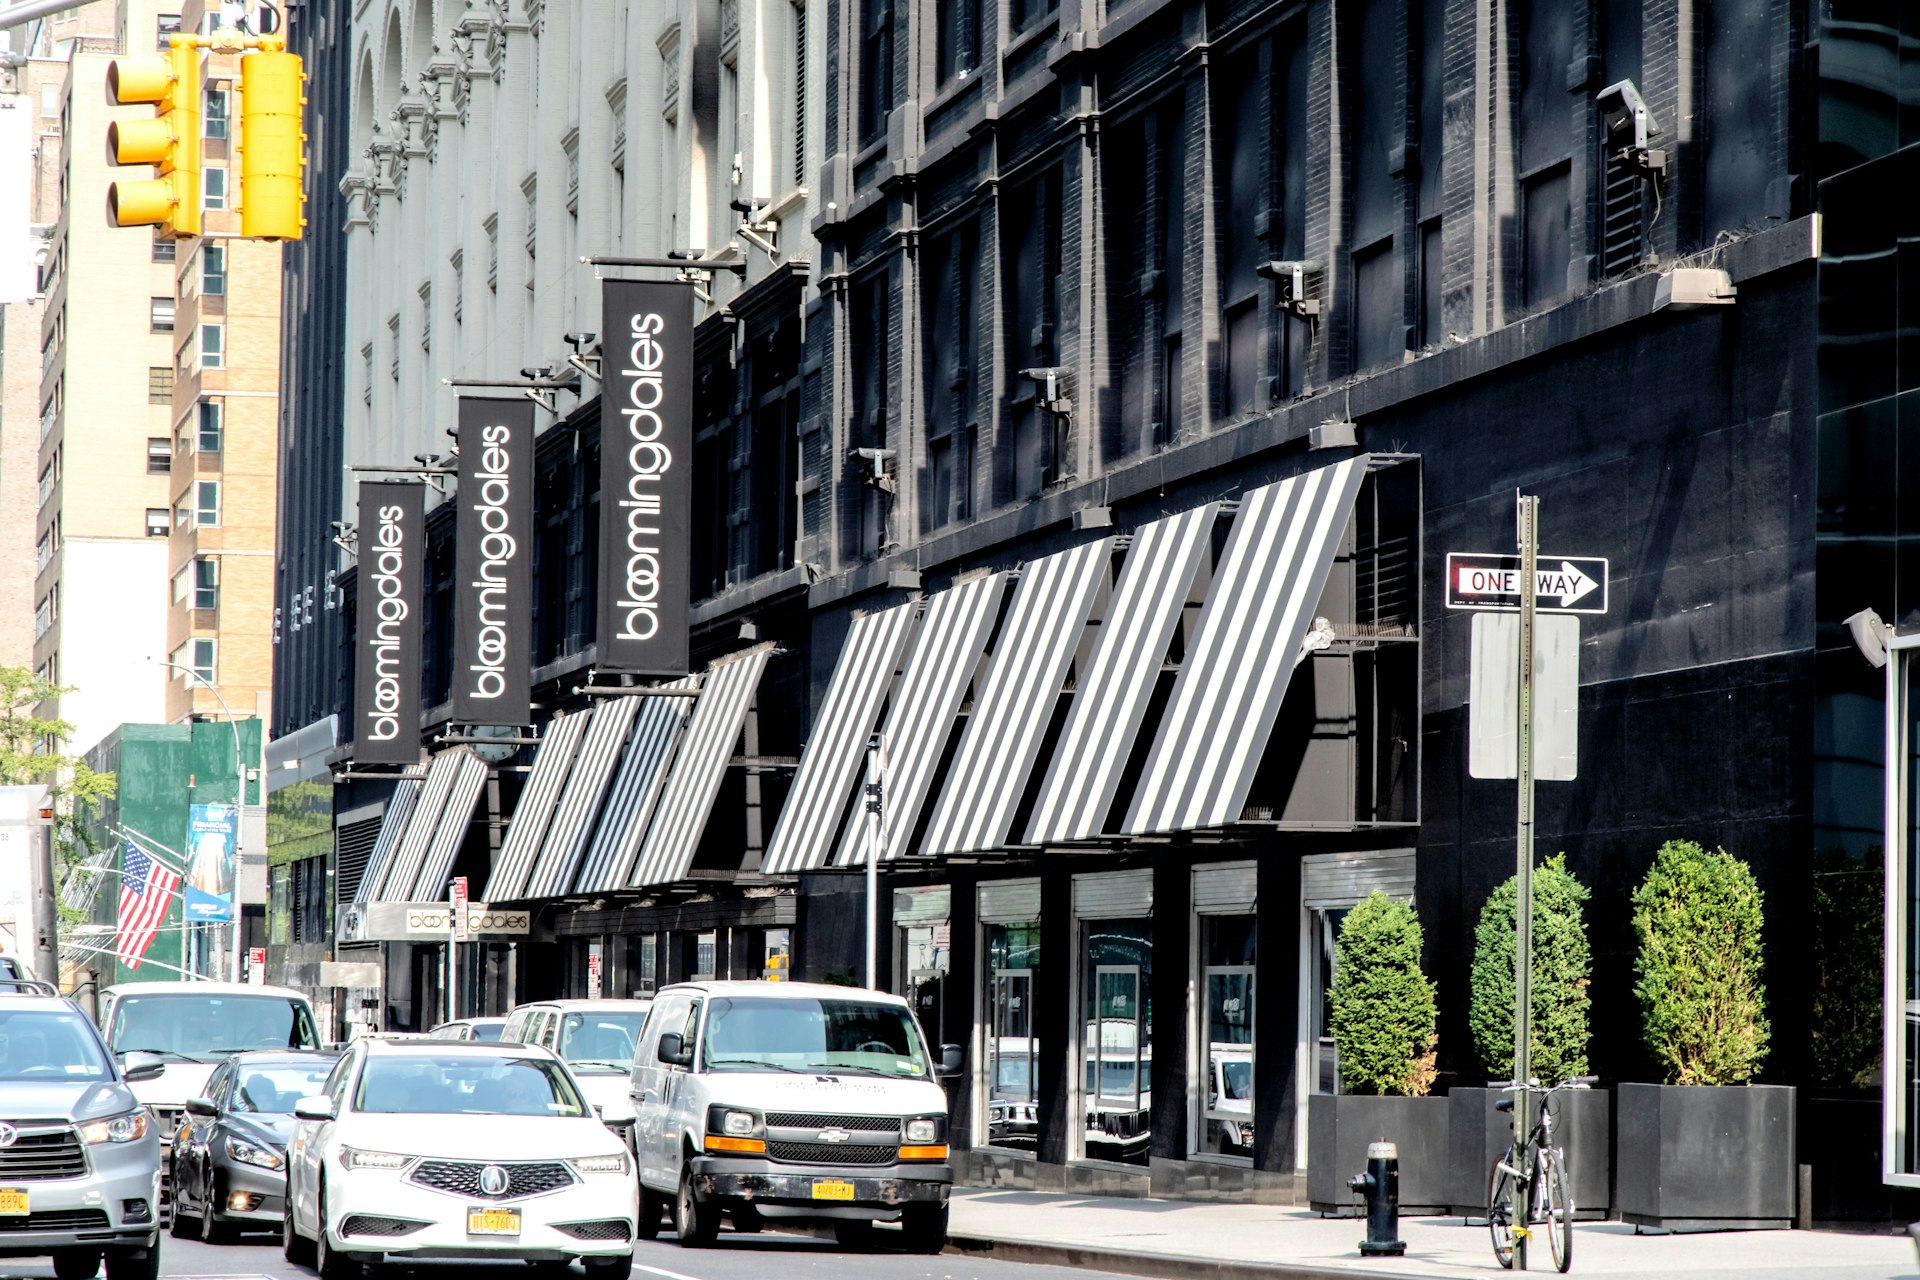 The exterior of a large department store with Bloomingdale's written on its black and white awnings